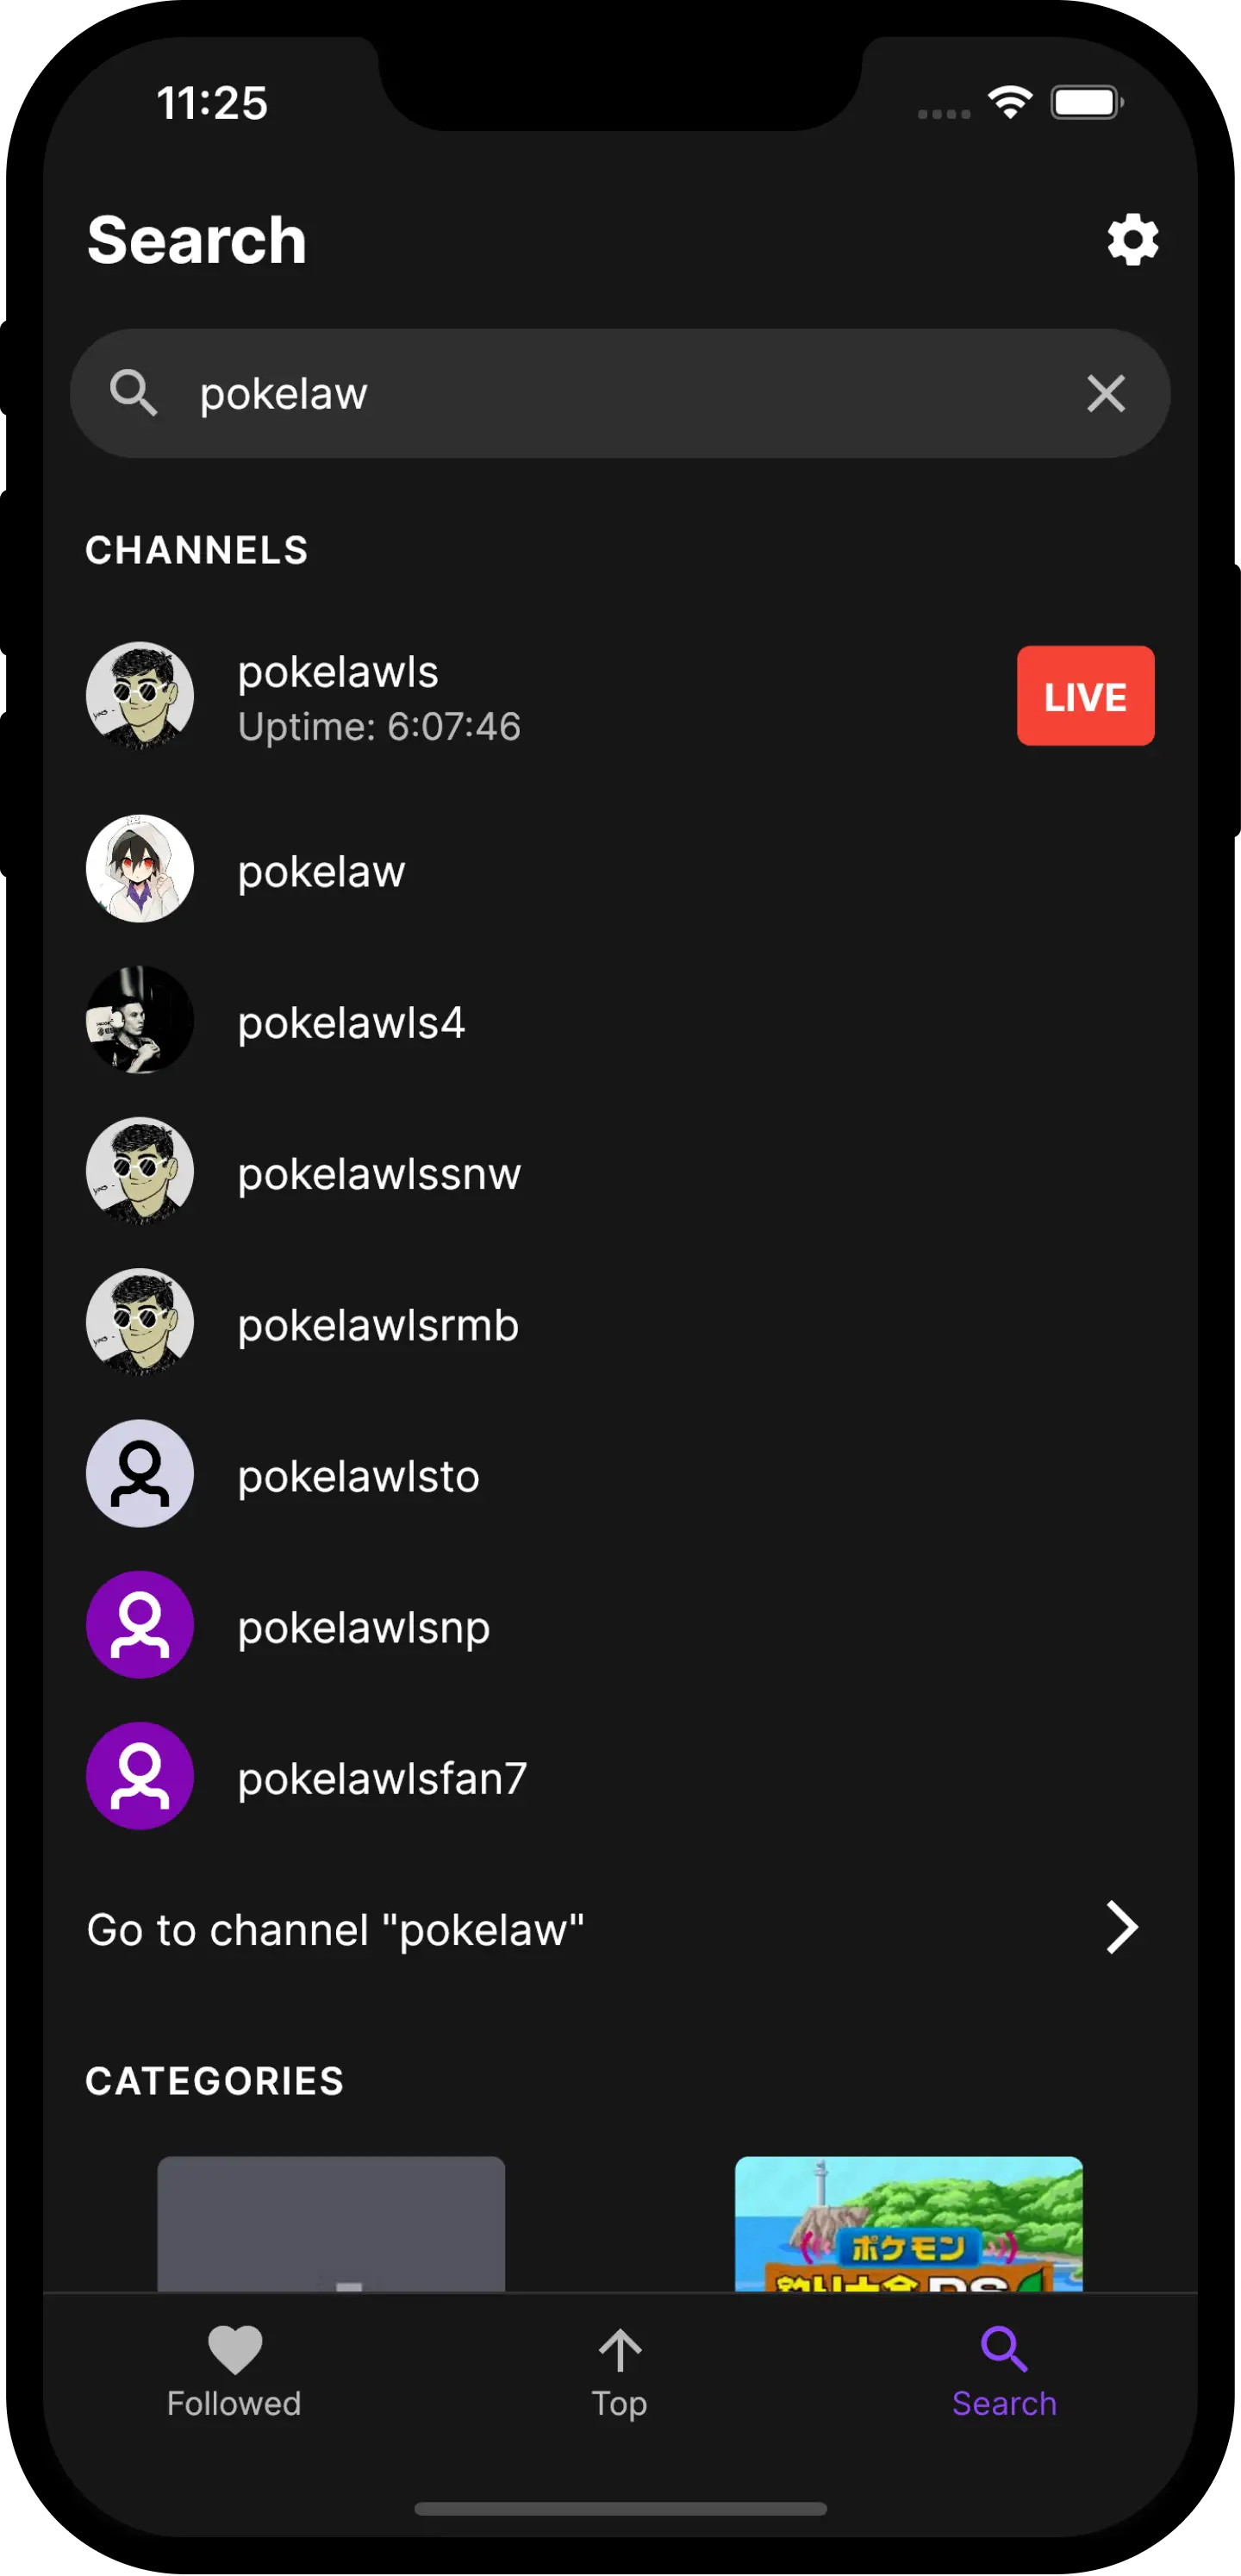 Screenshot of the search tab, showing the channel and category results from a search query of "pokelaw".